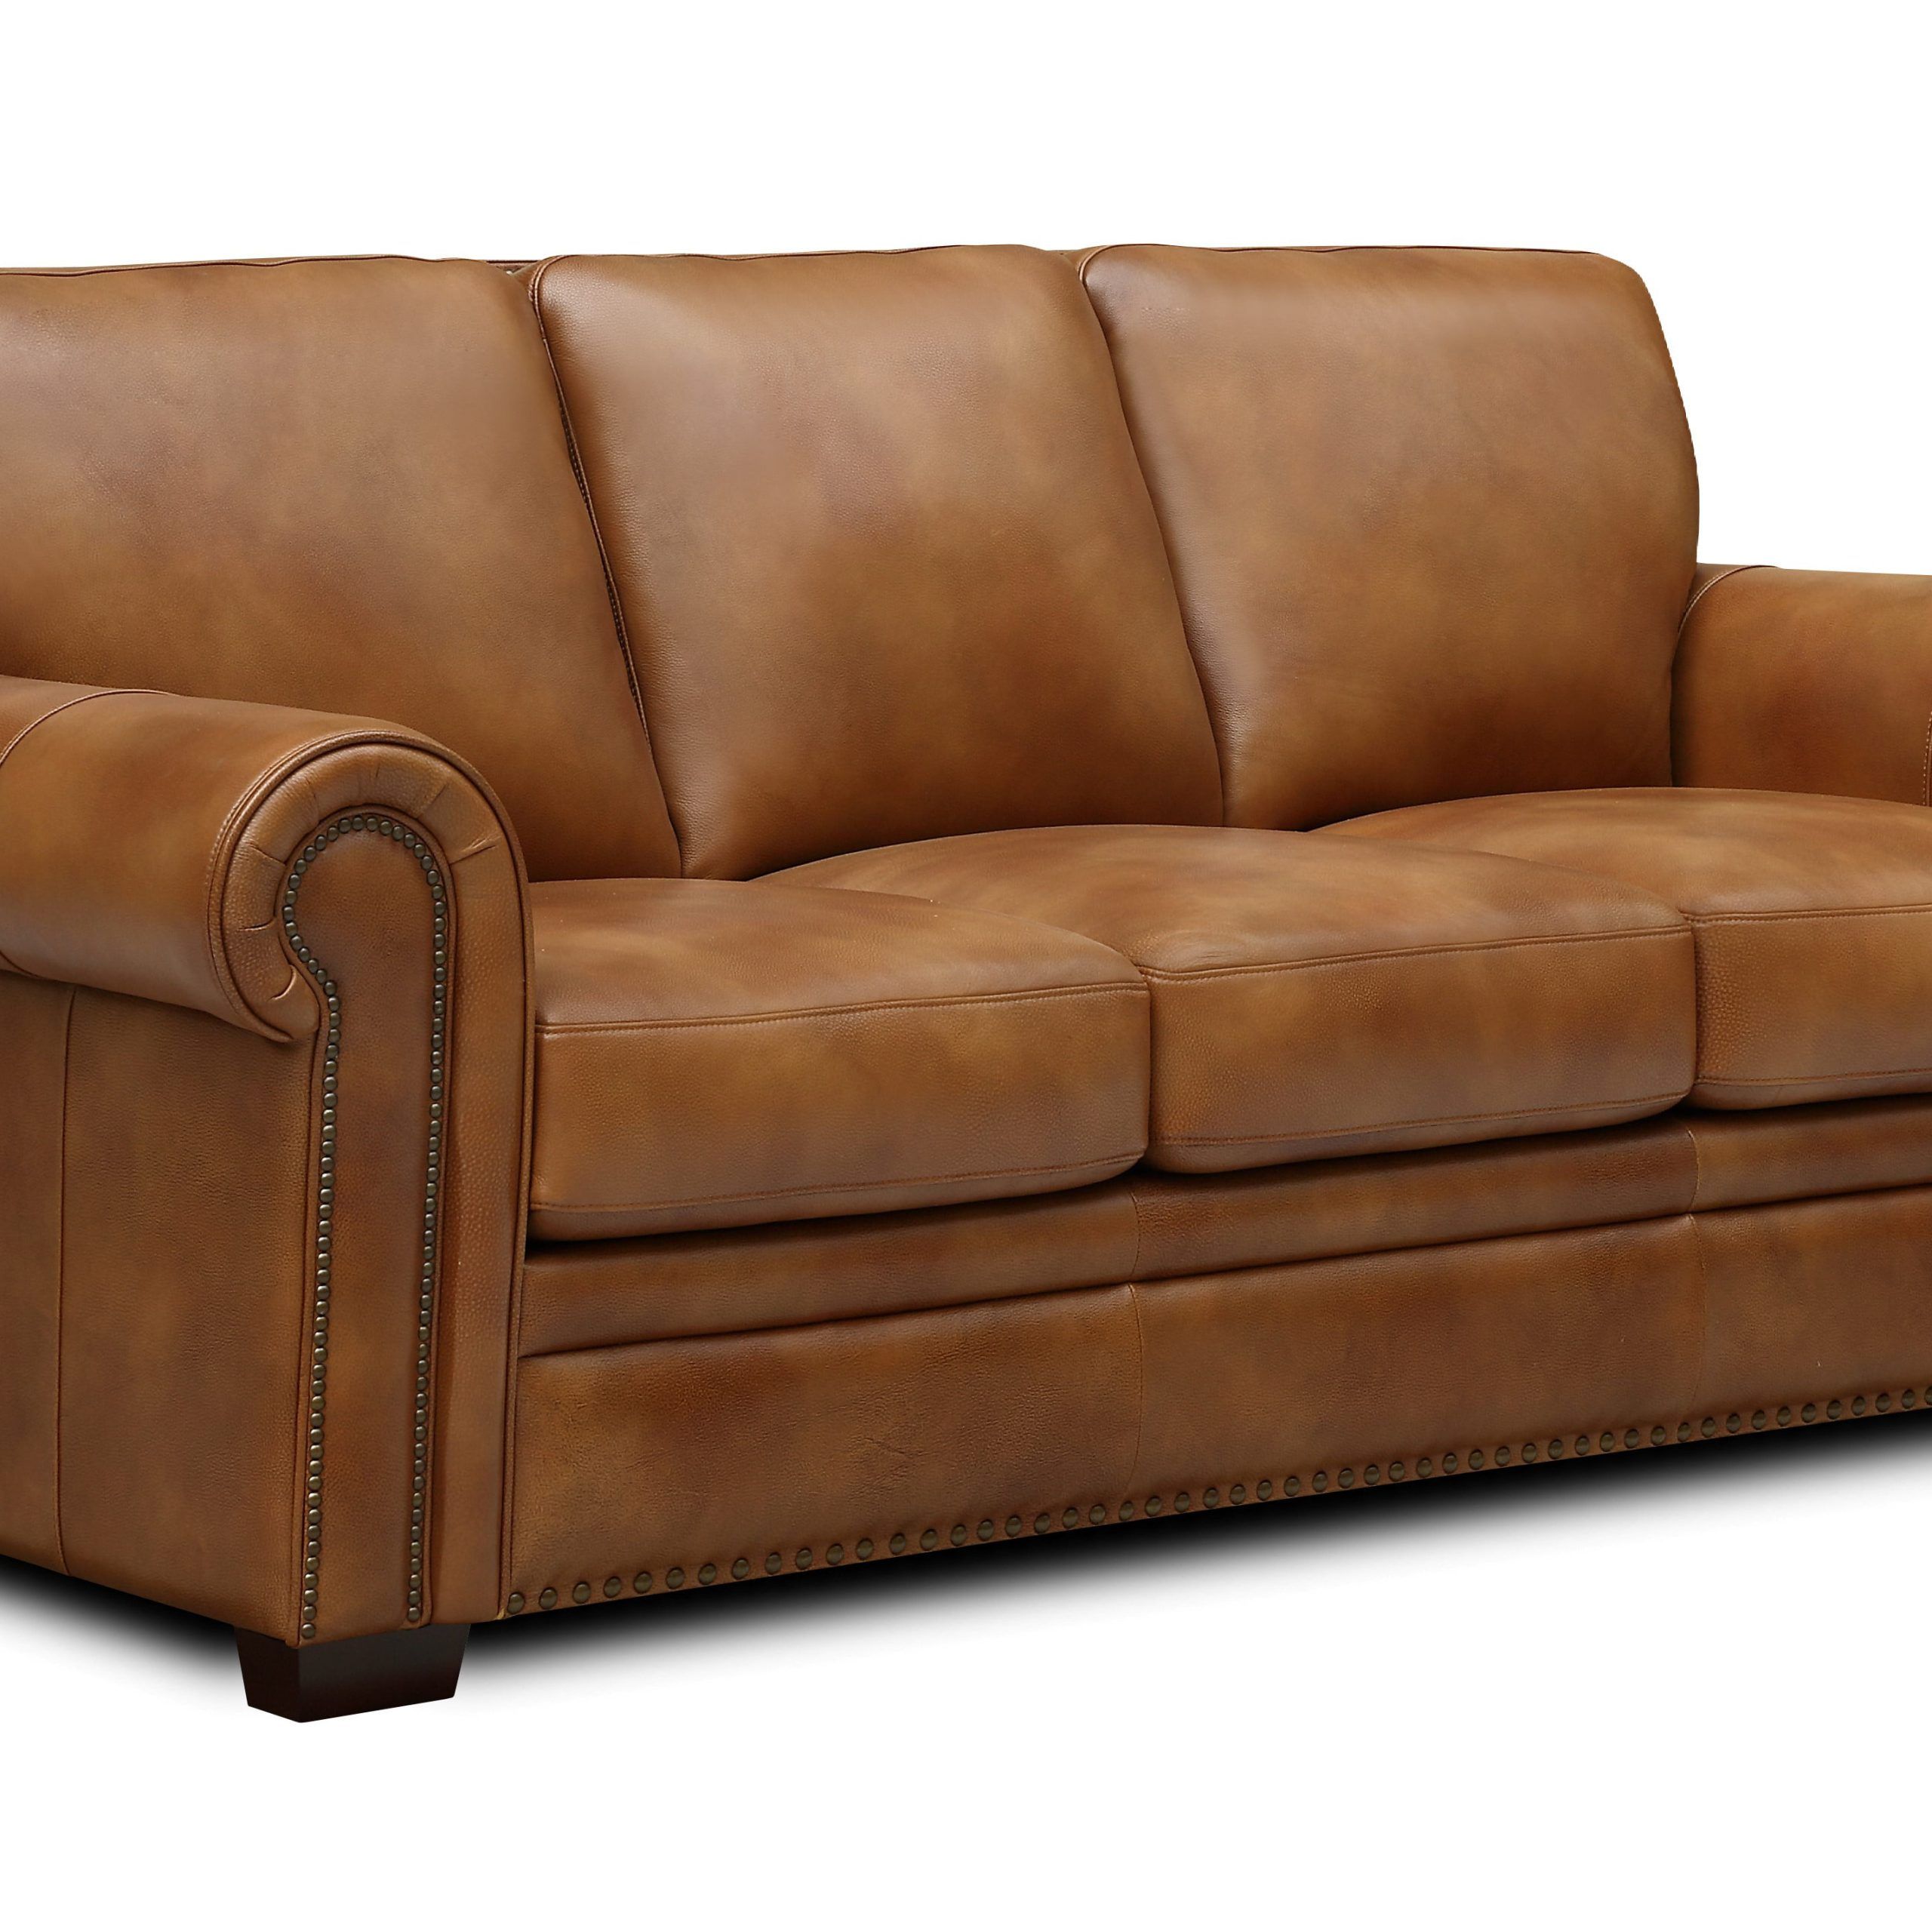 Top Grain Leather Loveseats Intended For Most Recent Toulouse Top Grain Leather Sofa – Walmart (View 5 of 15)